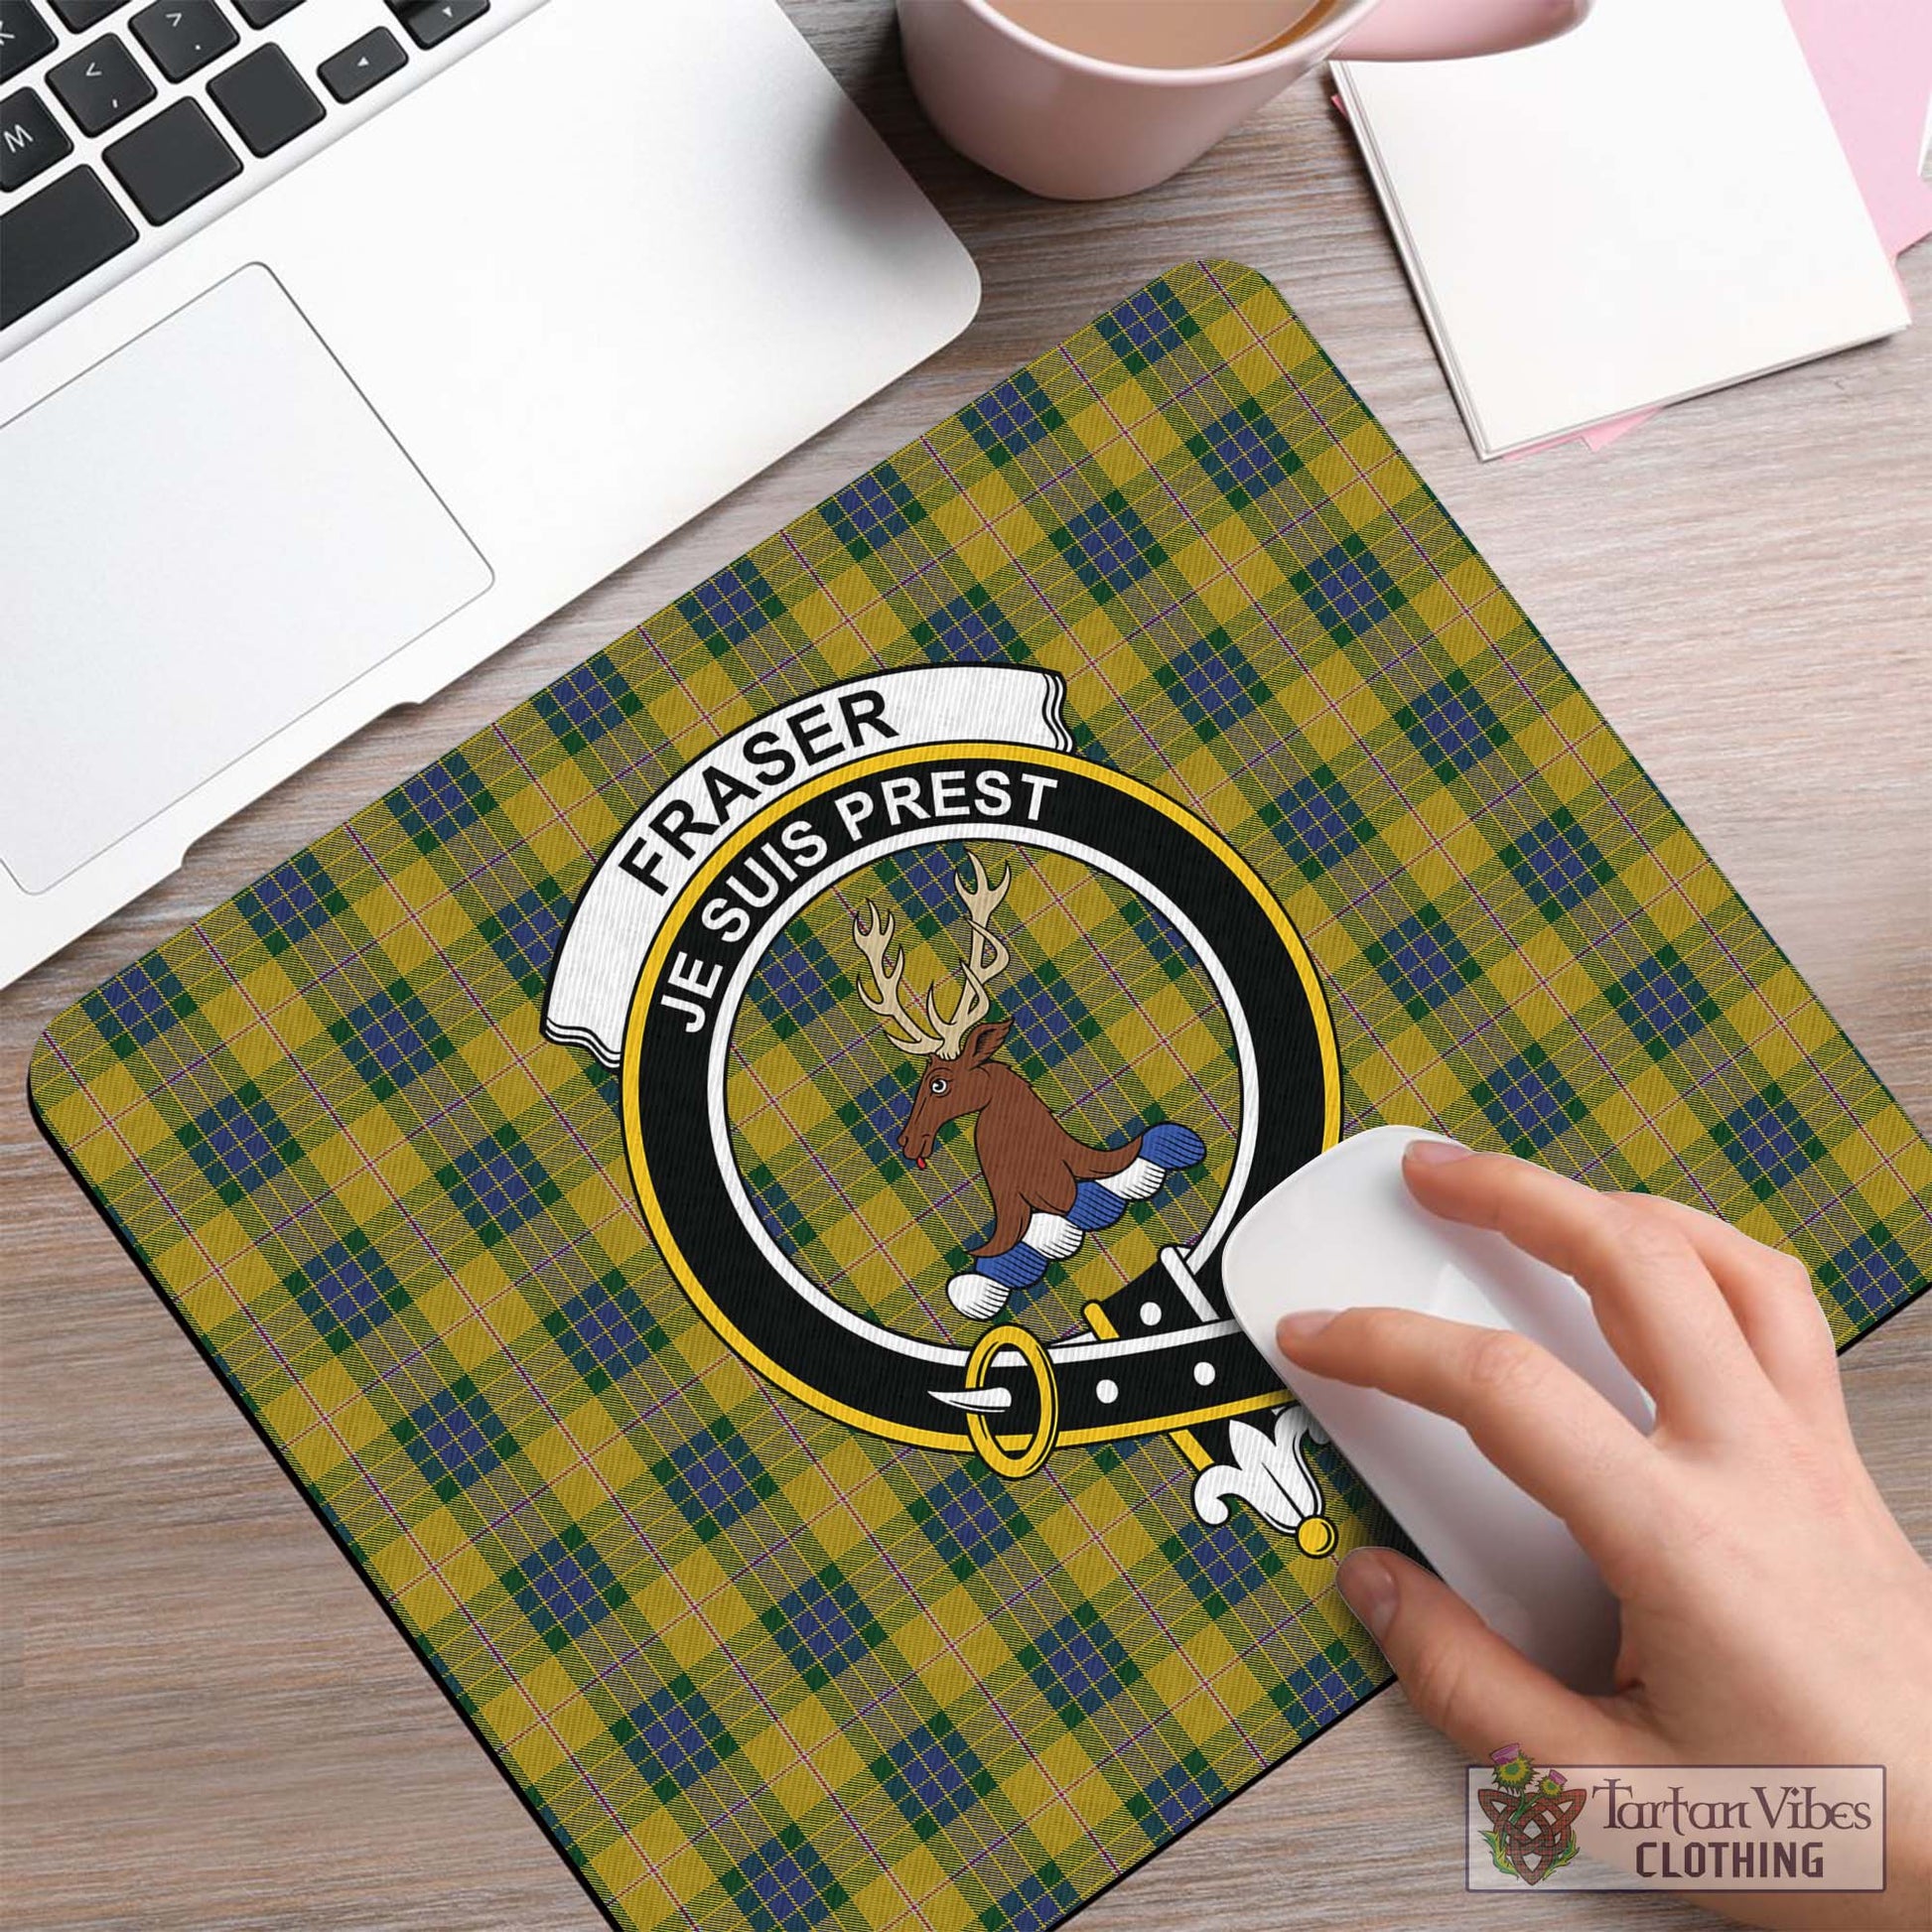 Tartan Vibes Clothing Fraser Yellow Tartan Mouse Pad with Family Crest